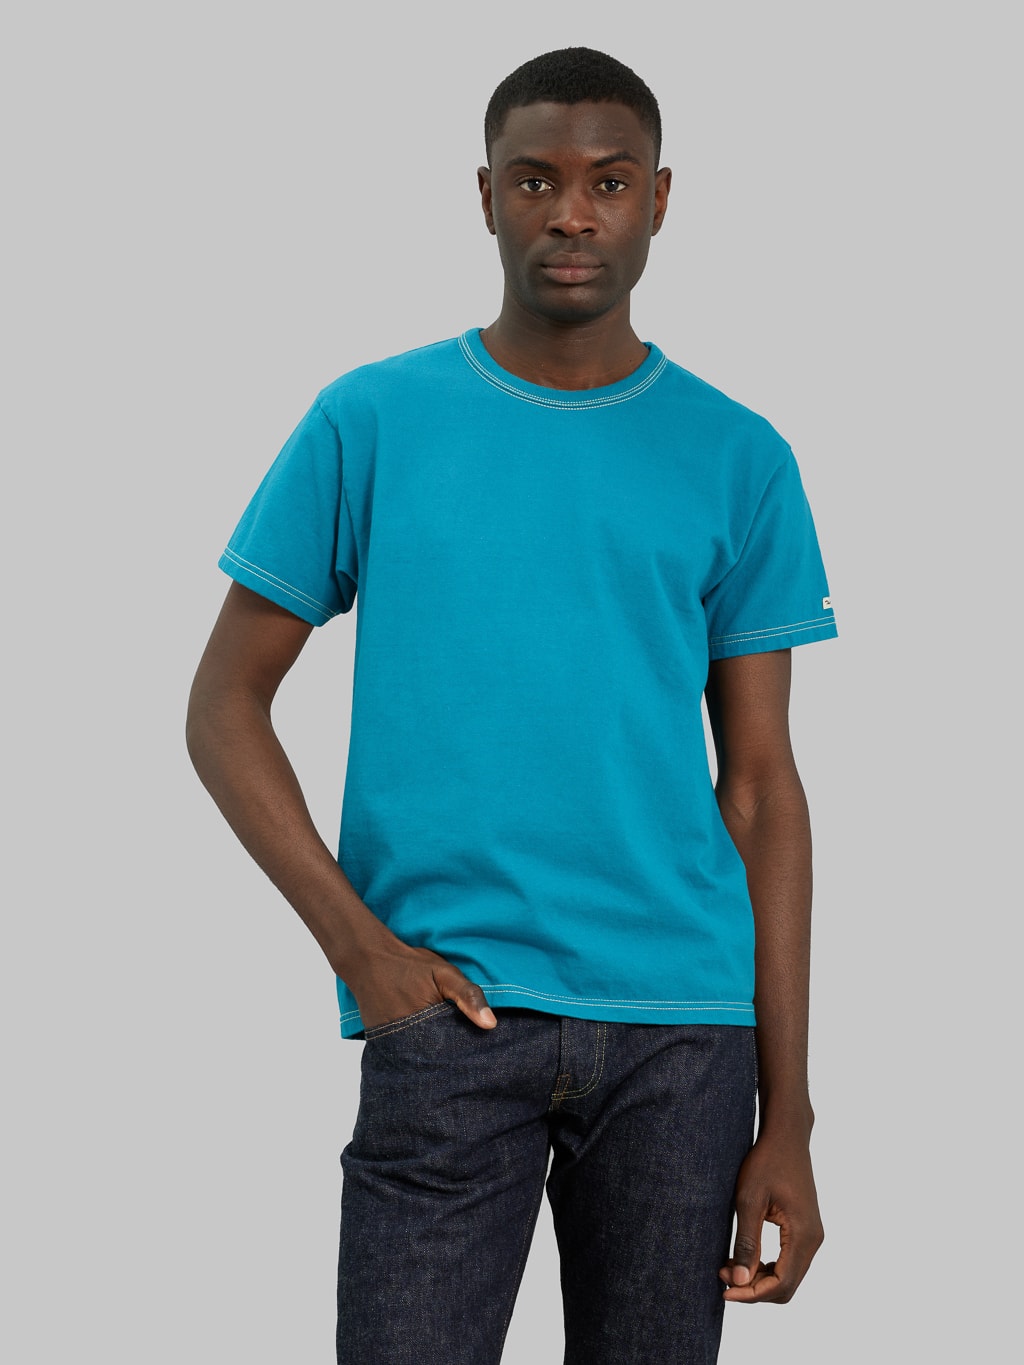 The Flat Head Plain Heavyweight TShirt turquoise model front fit